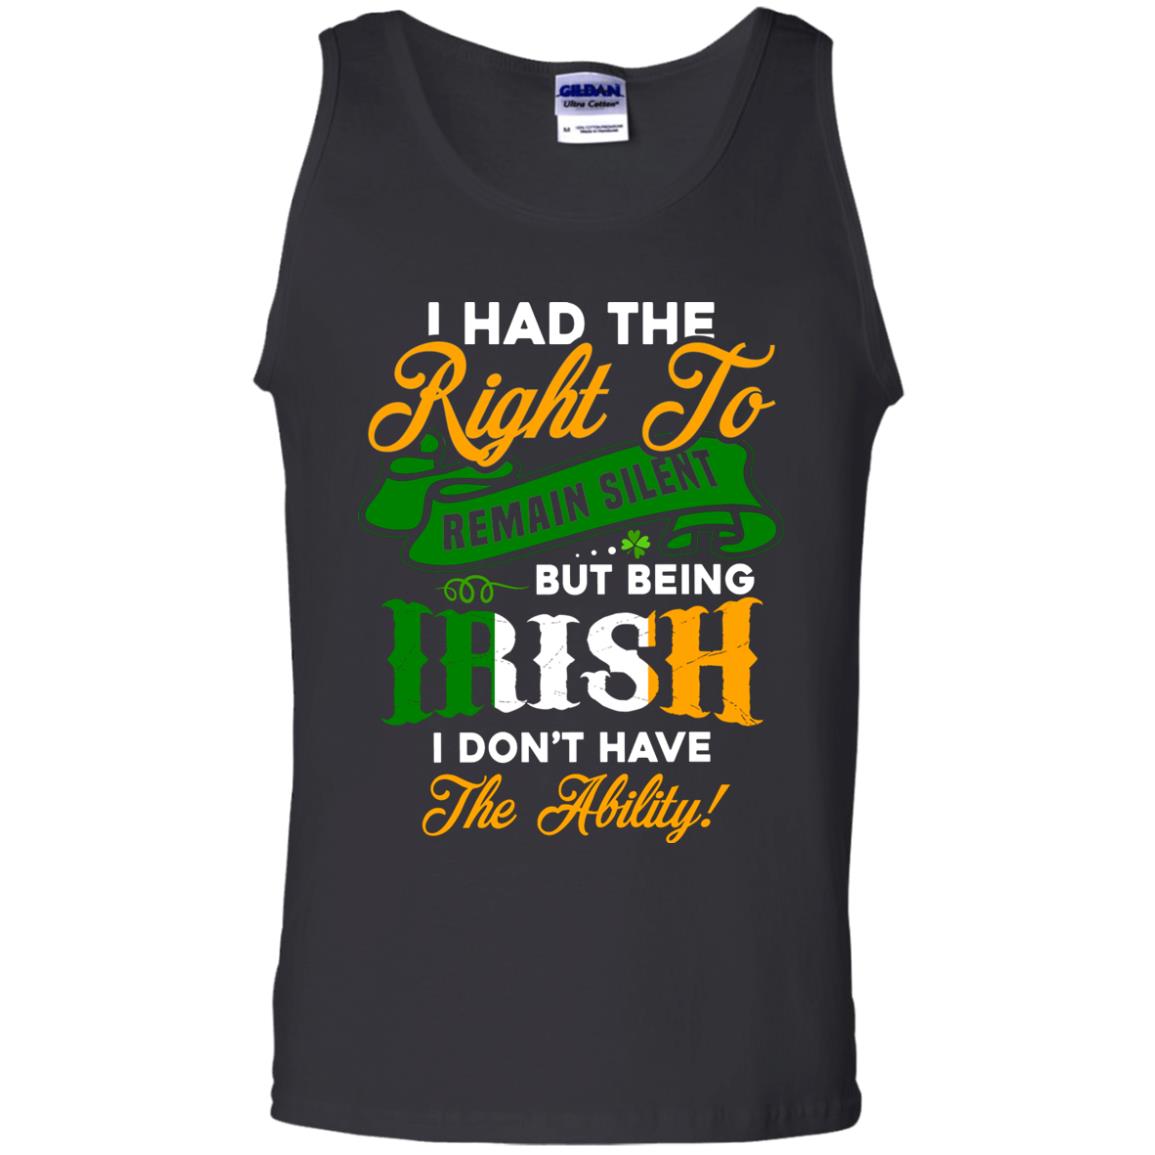 I Had The Right To Remain Silent But Being Irish I Don_t Have The BilityG220 Gildan 100% Cotton Tank Top